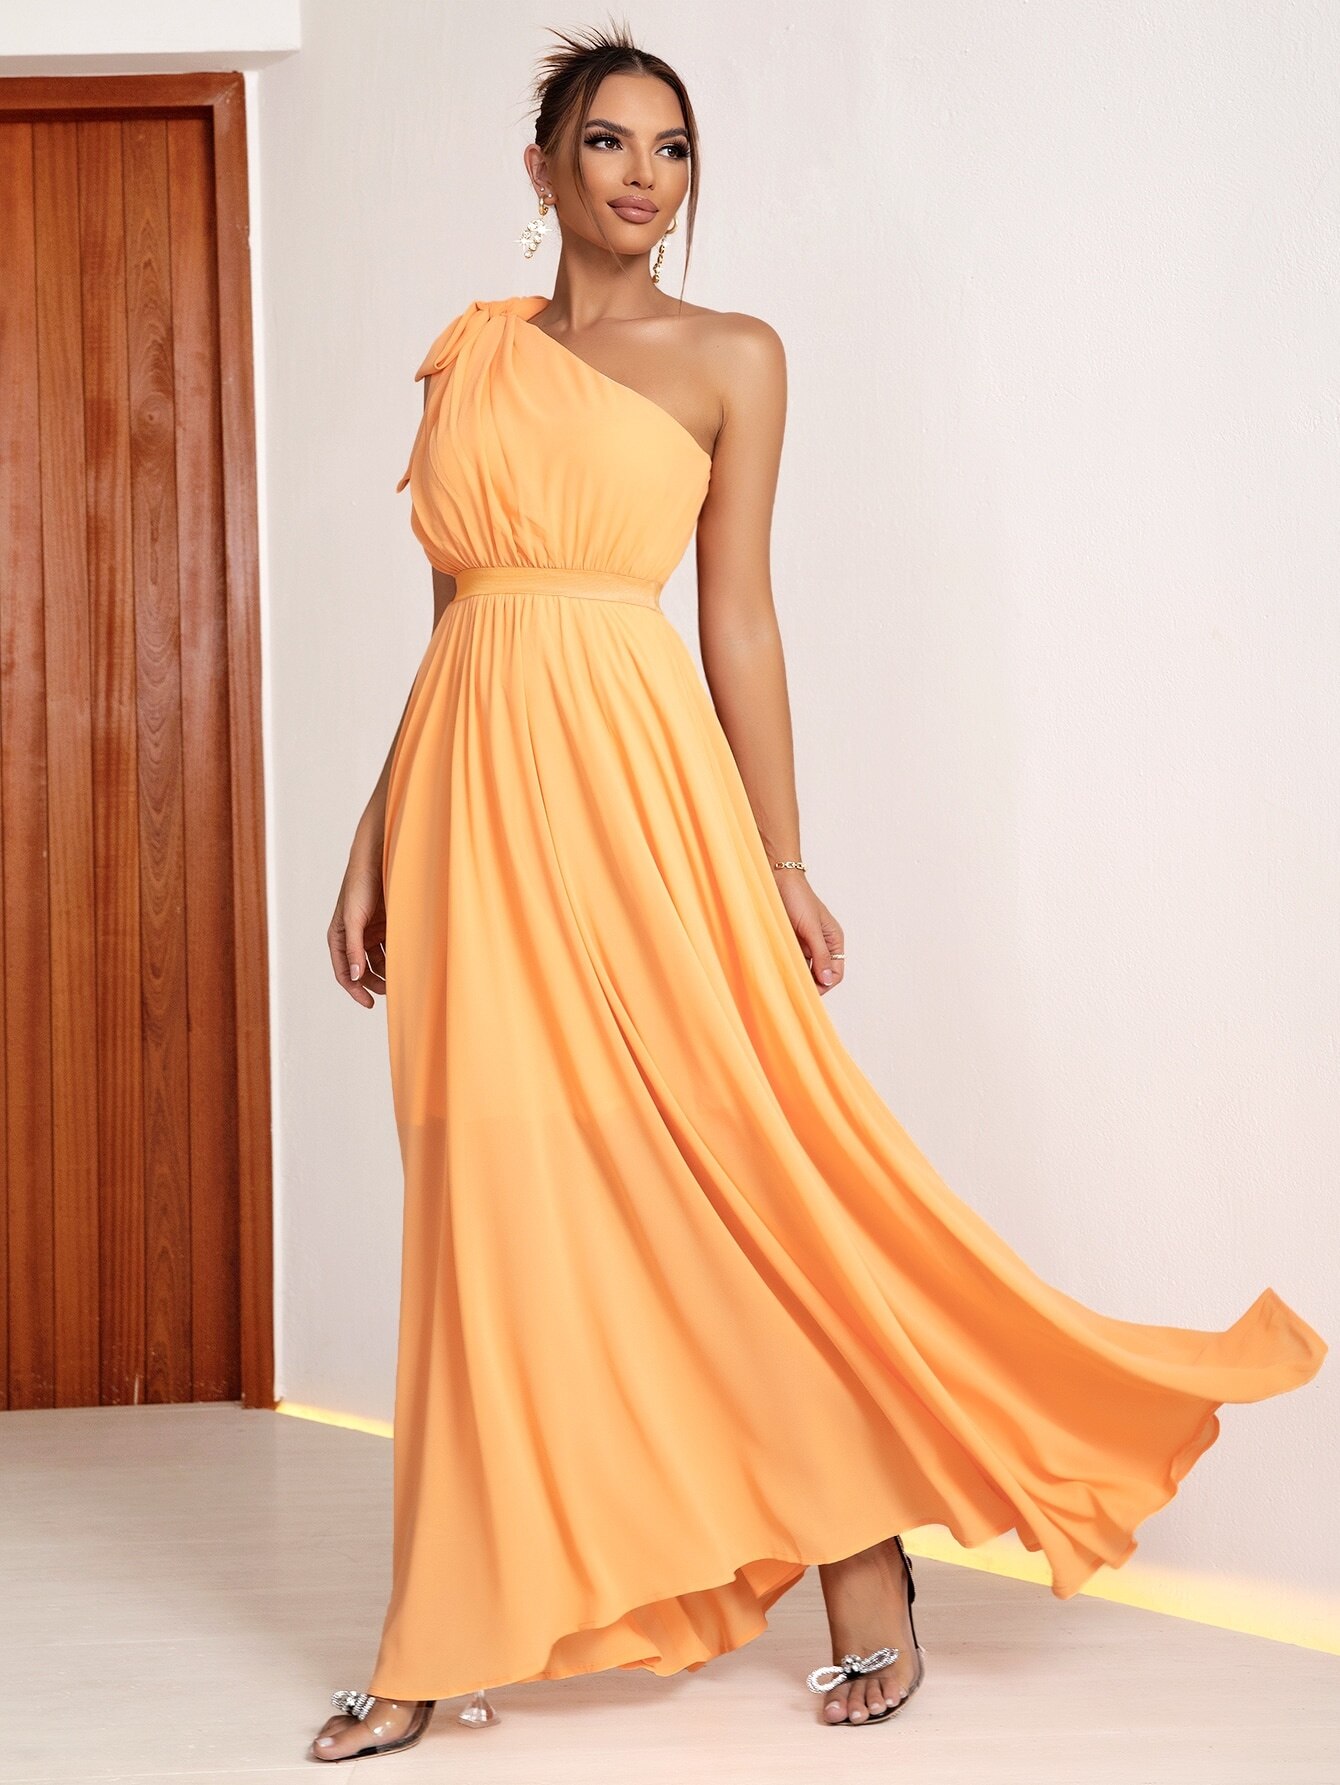 Yissang-Tie-One-Shoulder-Maxi-Dress-2